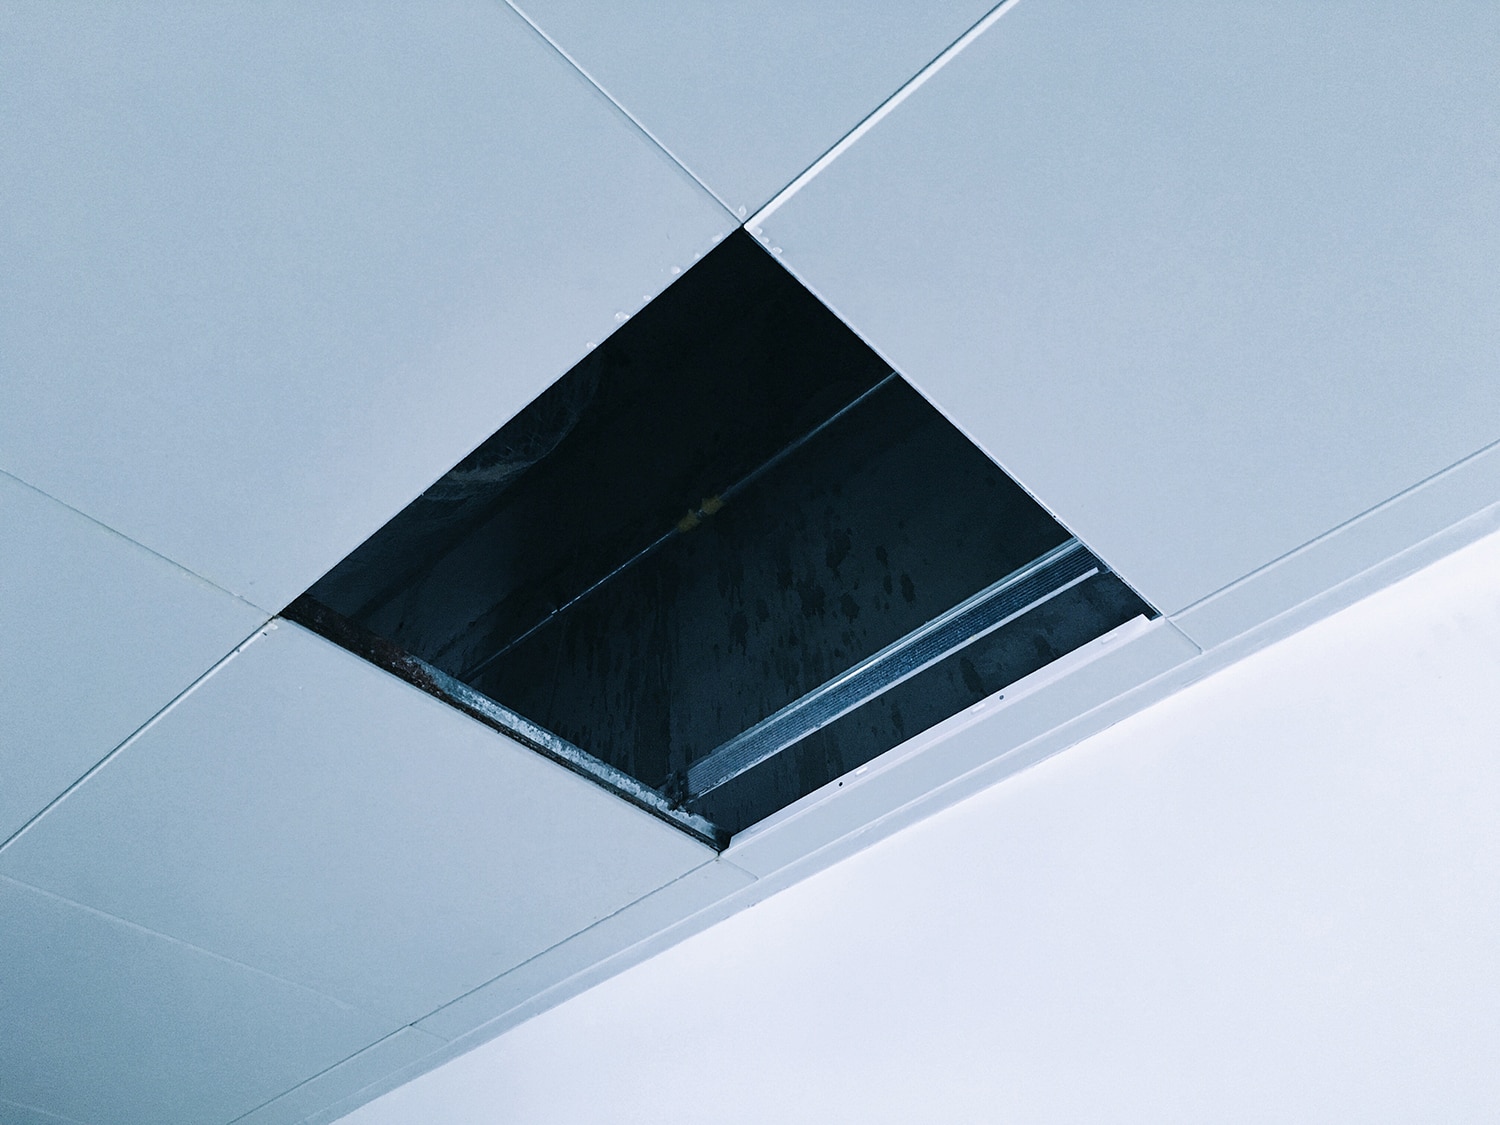 Drop ceiling in a room